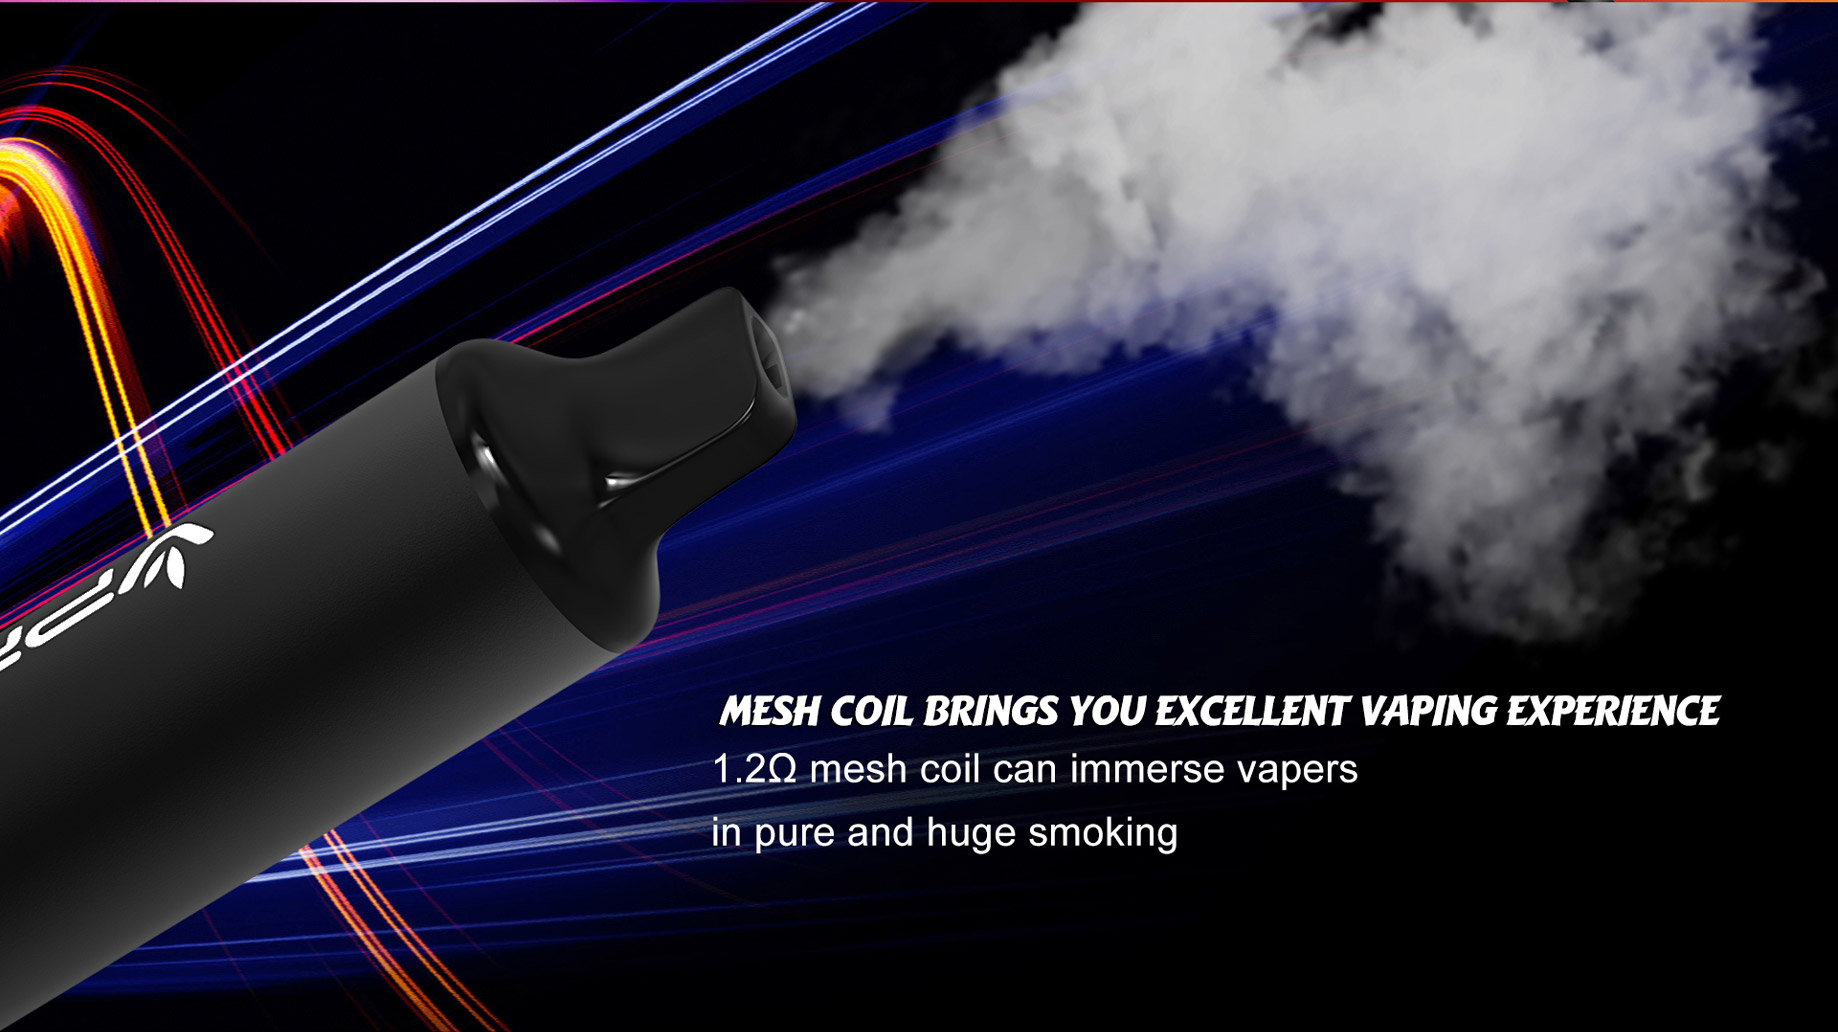 mesh coil brings your excellent vaping experience